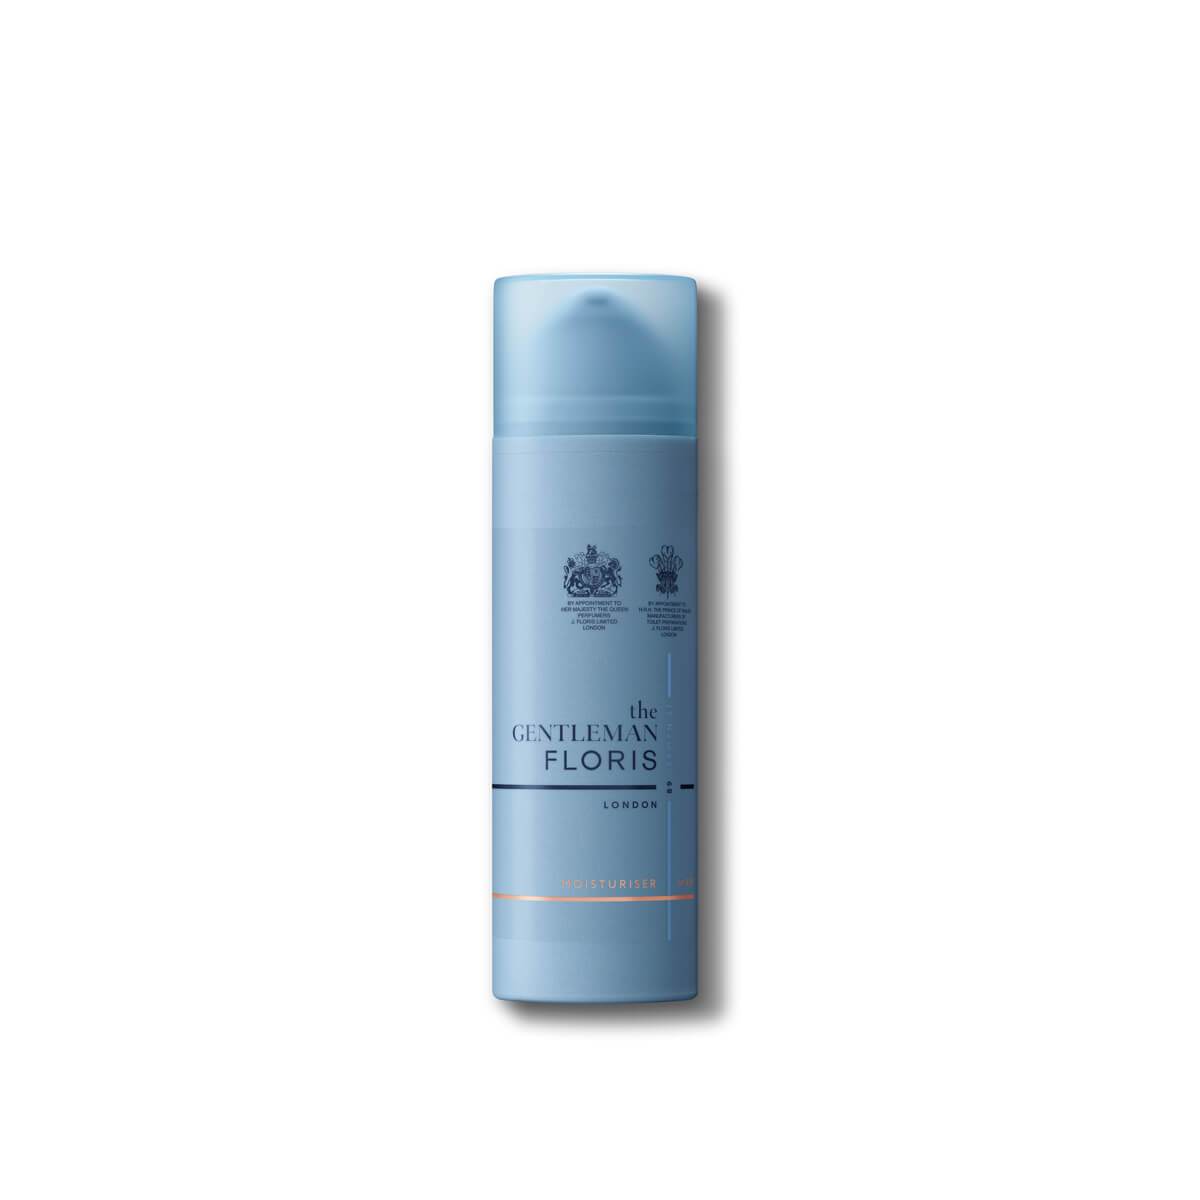 No. 89 Facial Moisturiser in a light blue stand up plastic pump bottle with a lid, with navy logo on the bottle. 